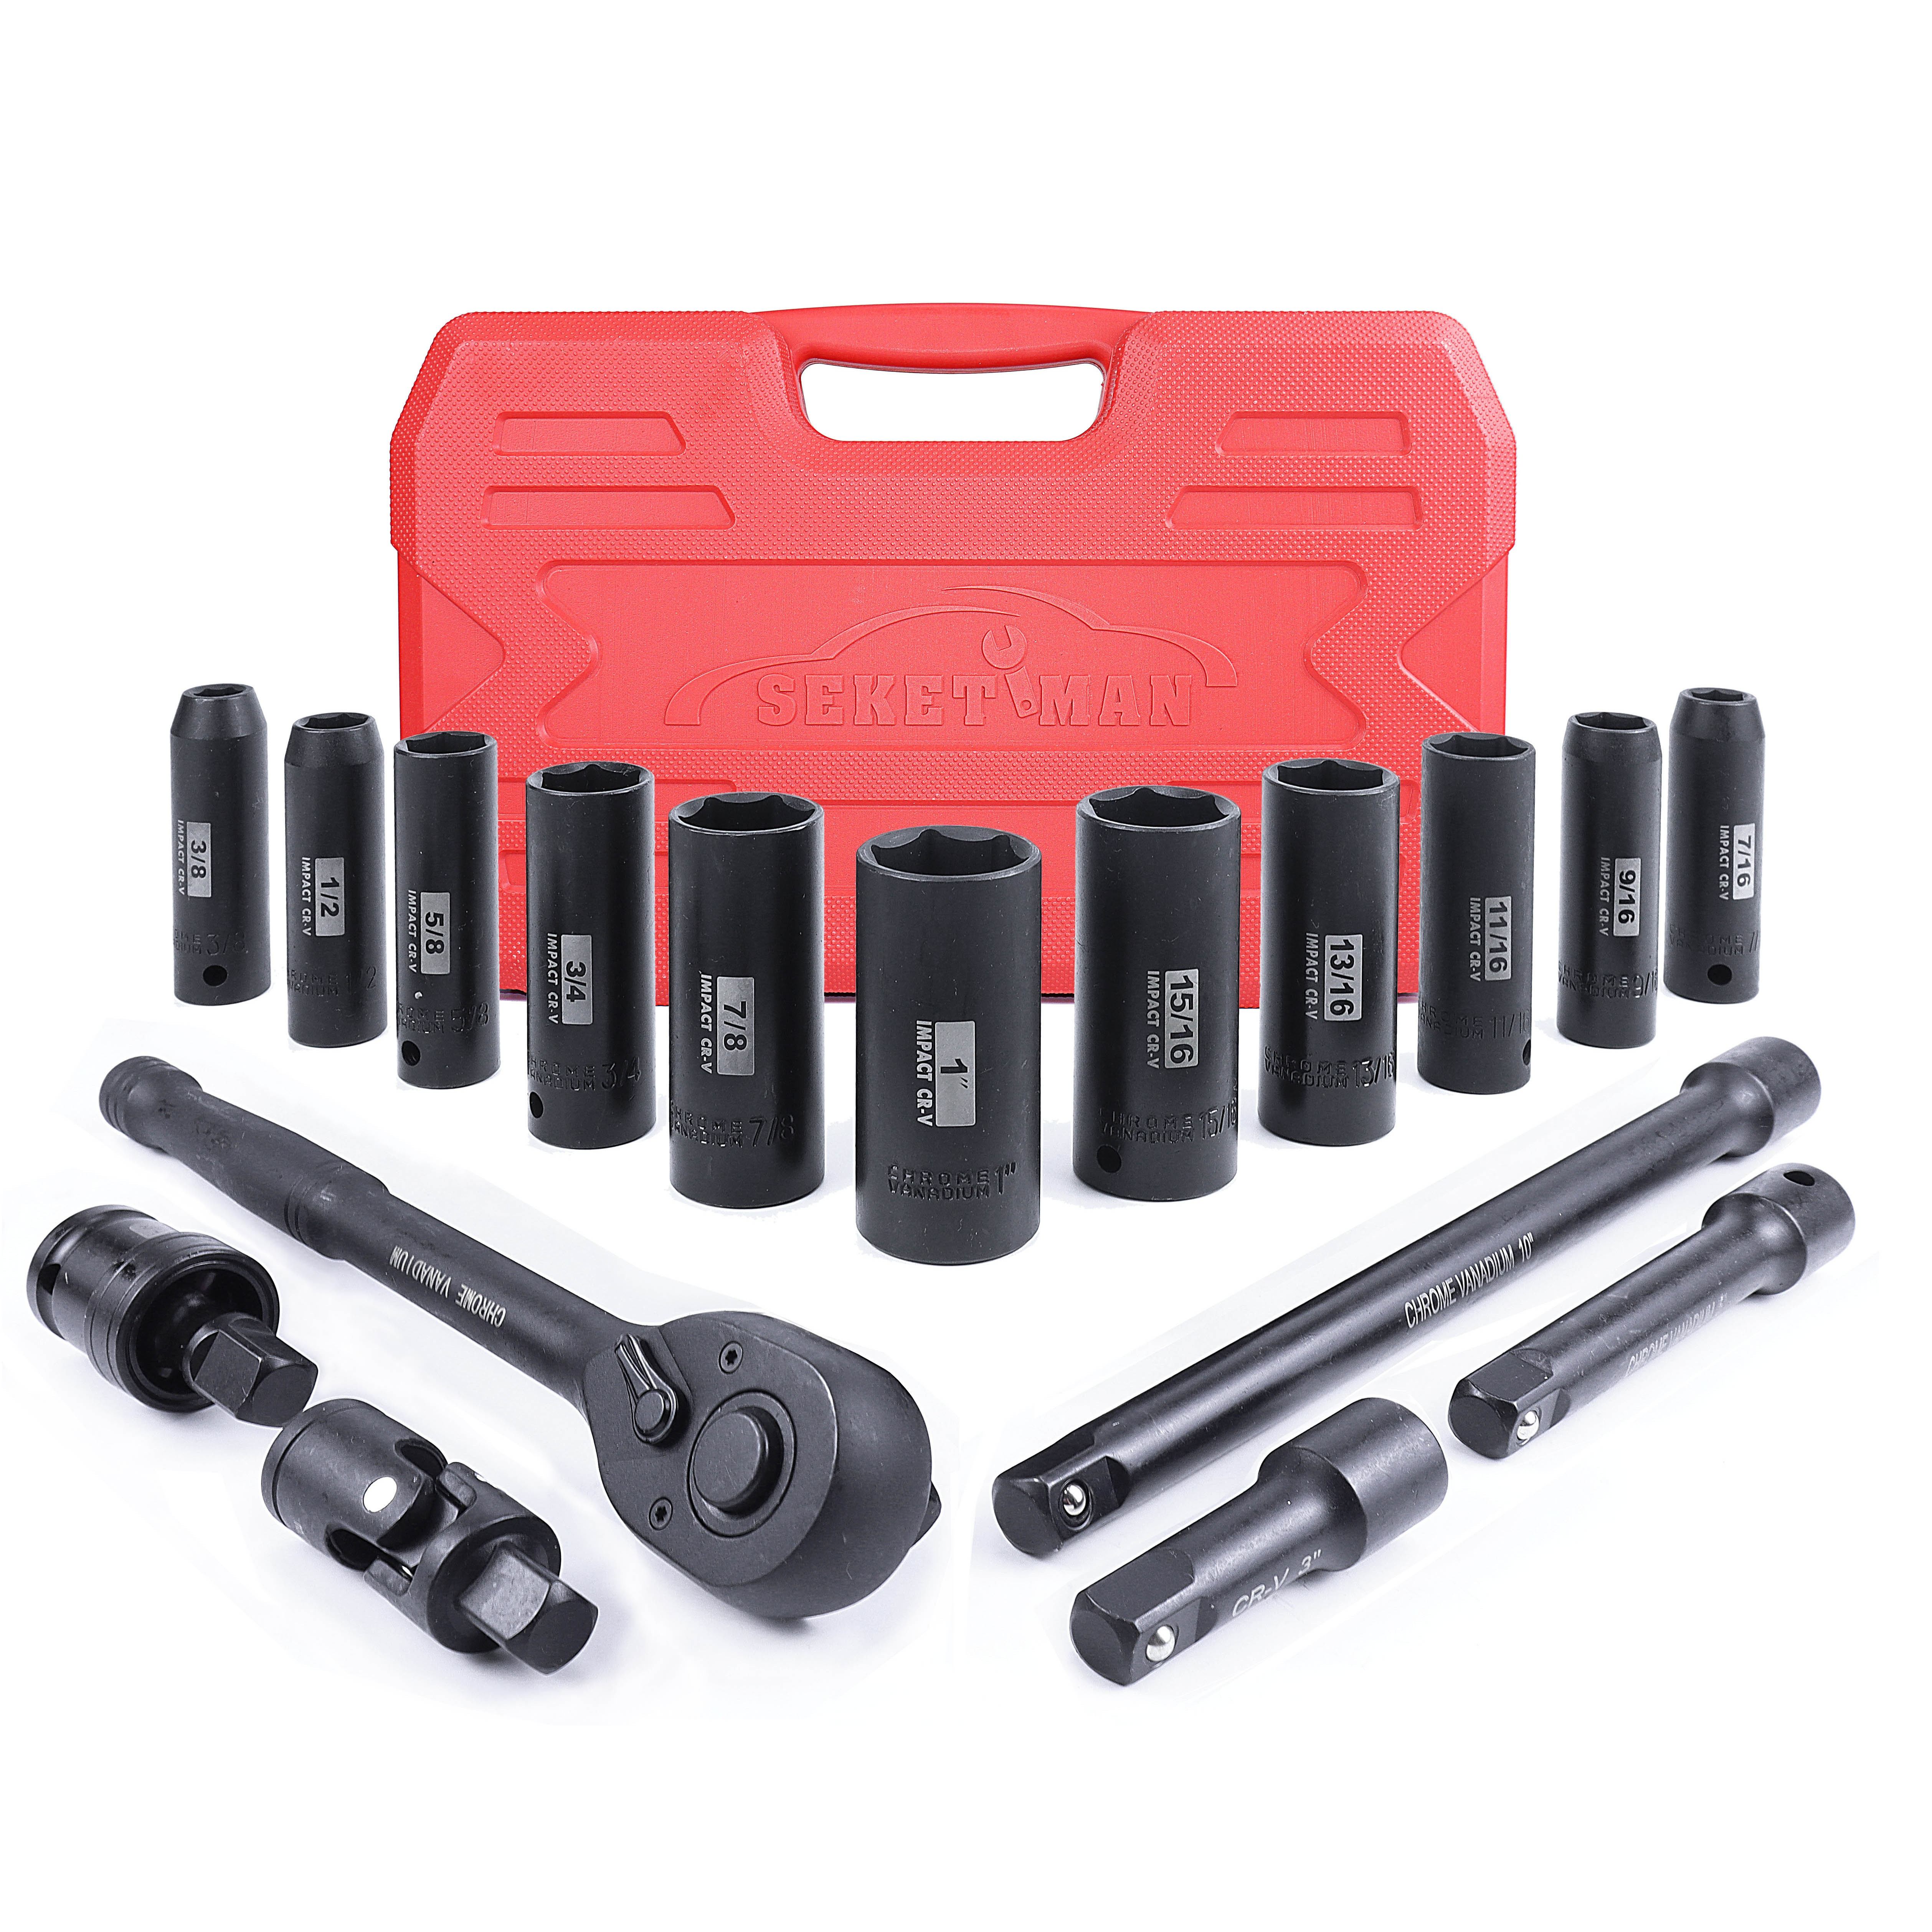 

17pcs 1/2-inch Drive Deep Impact Socket Set, Sae (3/8-1"), 6 Point, Cr-v Steel, Includes Extension Bar, Universal Joint And Ratchet Handle